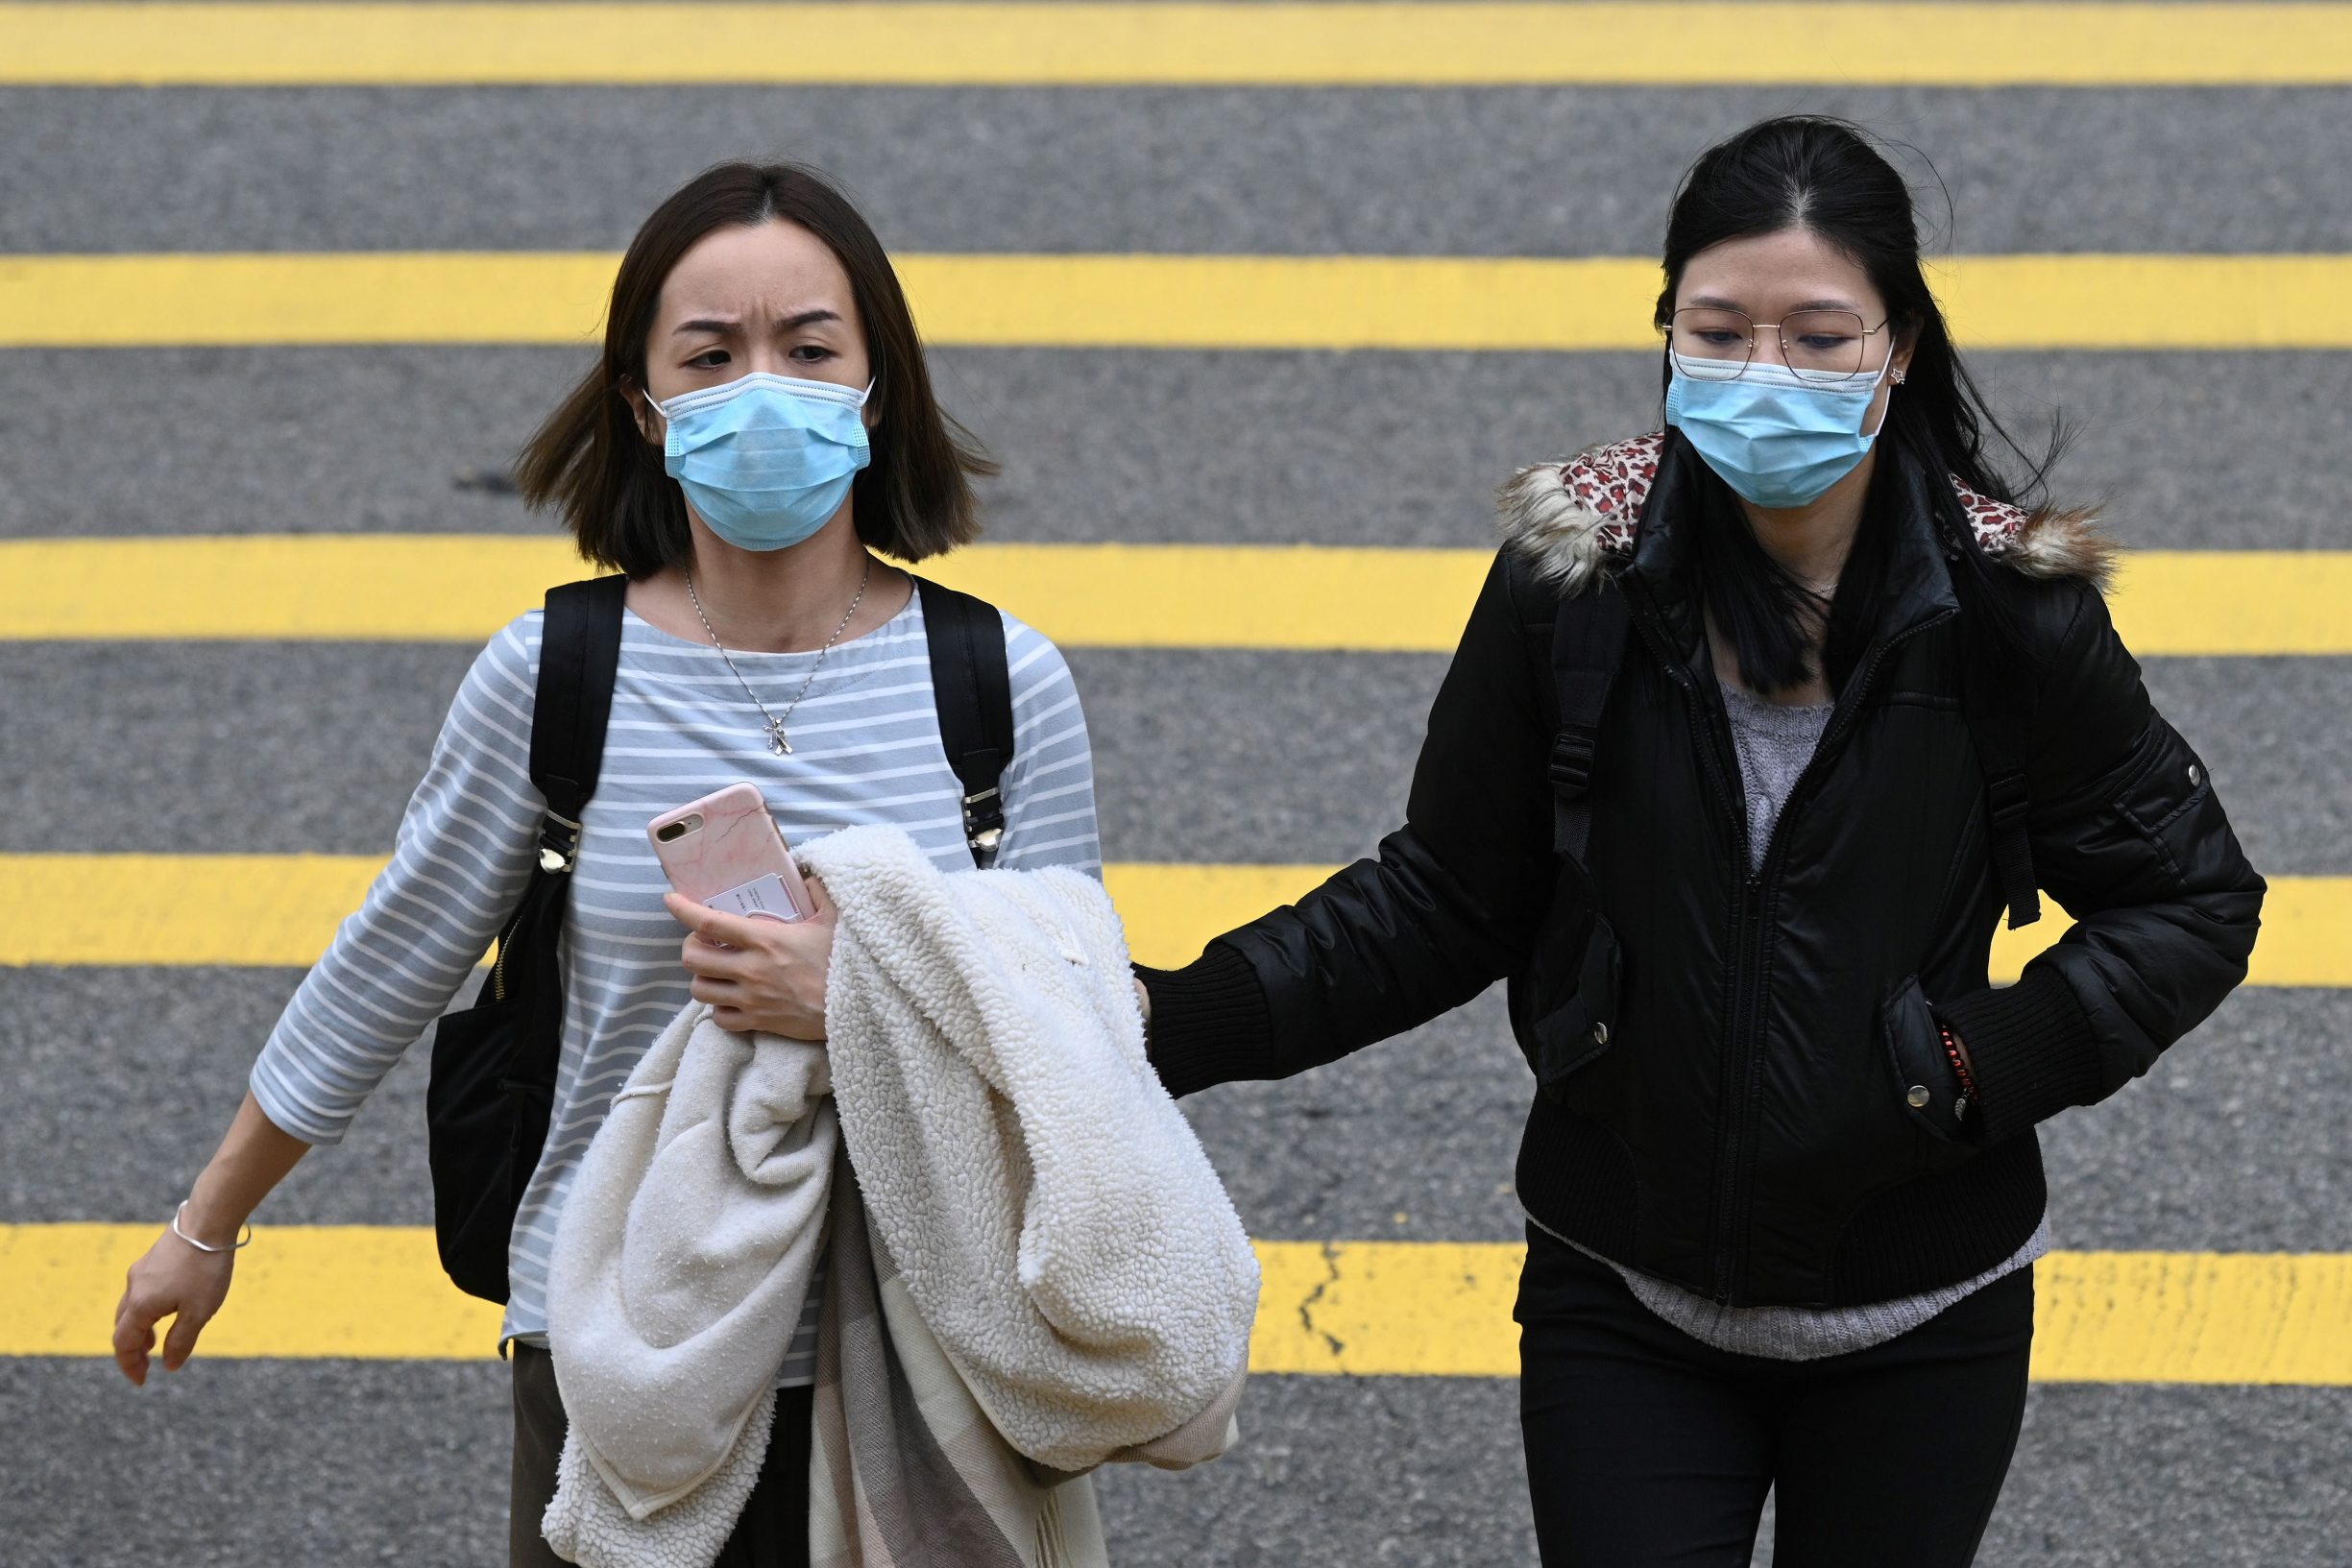 Two women wear face masks as they cross a road in Hong Kong on February 4, 2020, as a preventative measure following a virus outbreak which began in the Chinese city of Wuhan. - Hong Kong on February 4 become the second place outside of the Chinese mainland to report the death of a patient being treated for a new coronavirus that has so far claimed more than 400 lives. (Photo by Anthony WALLACE / AFP)